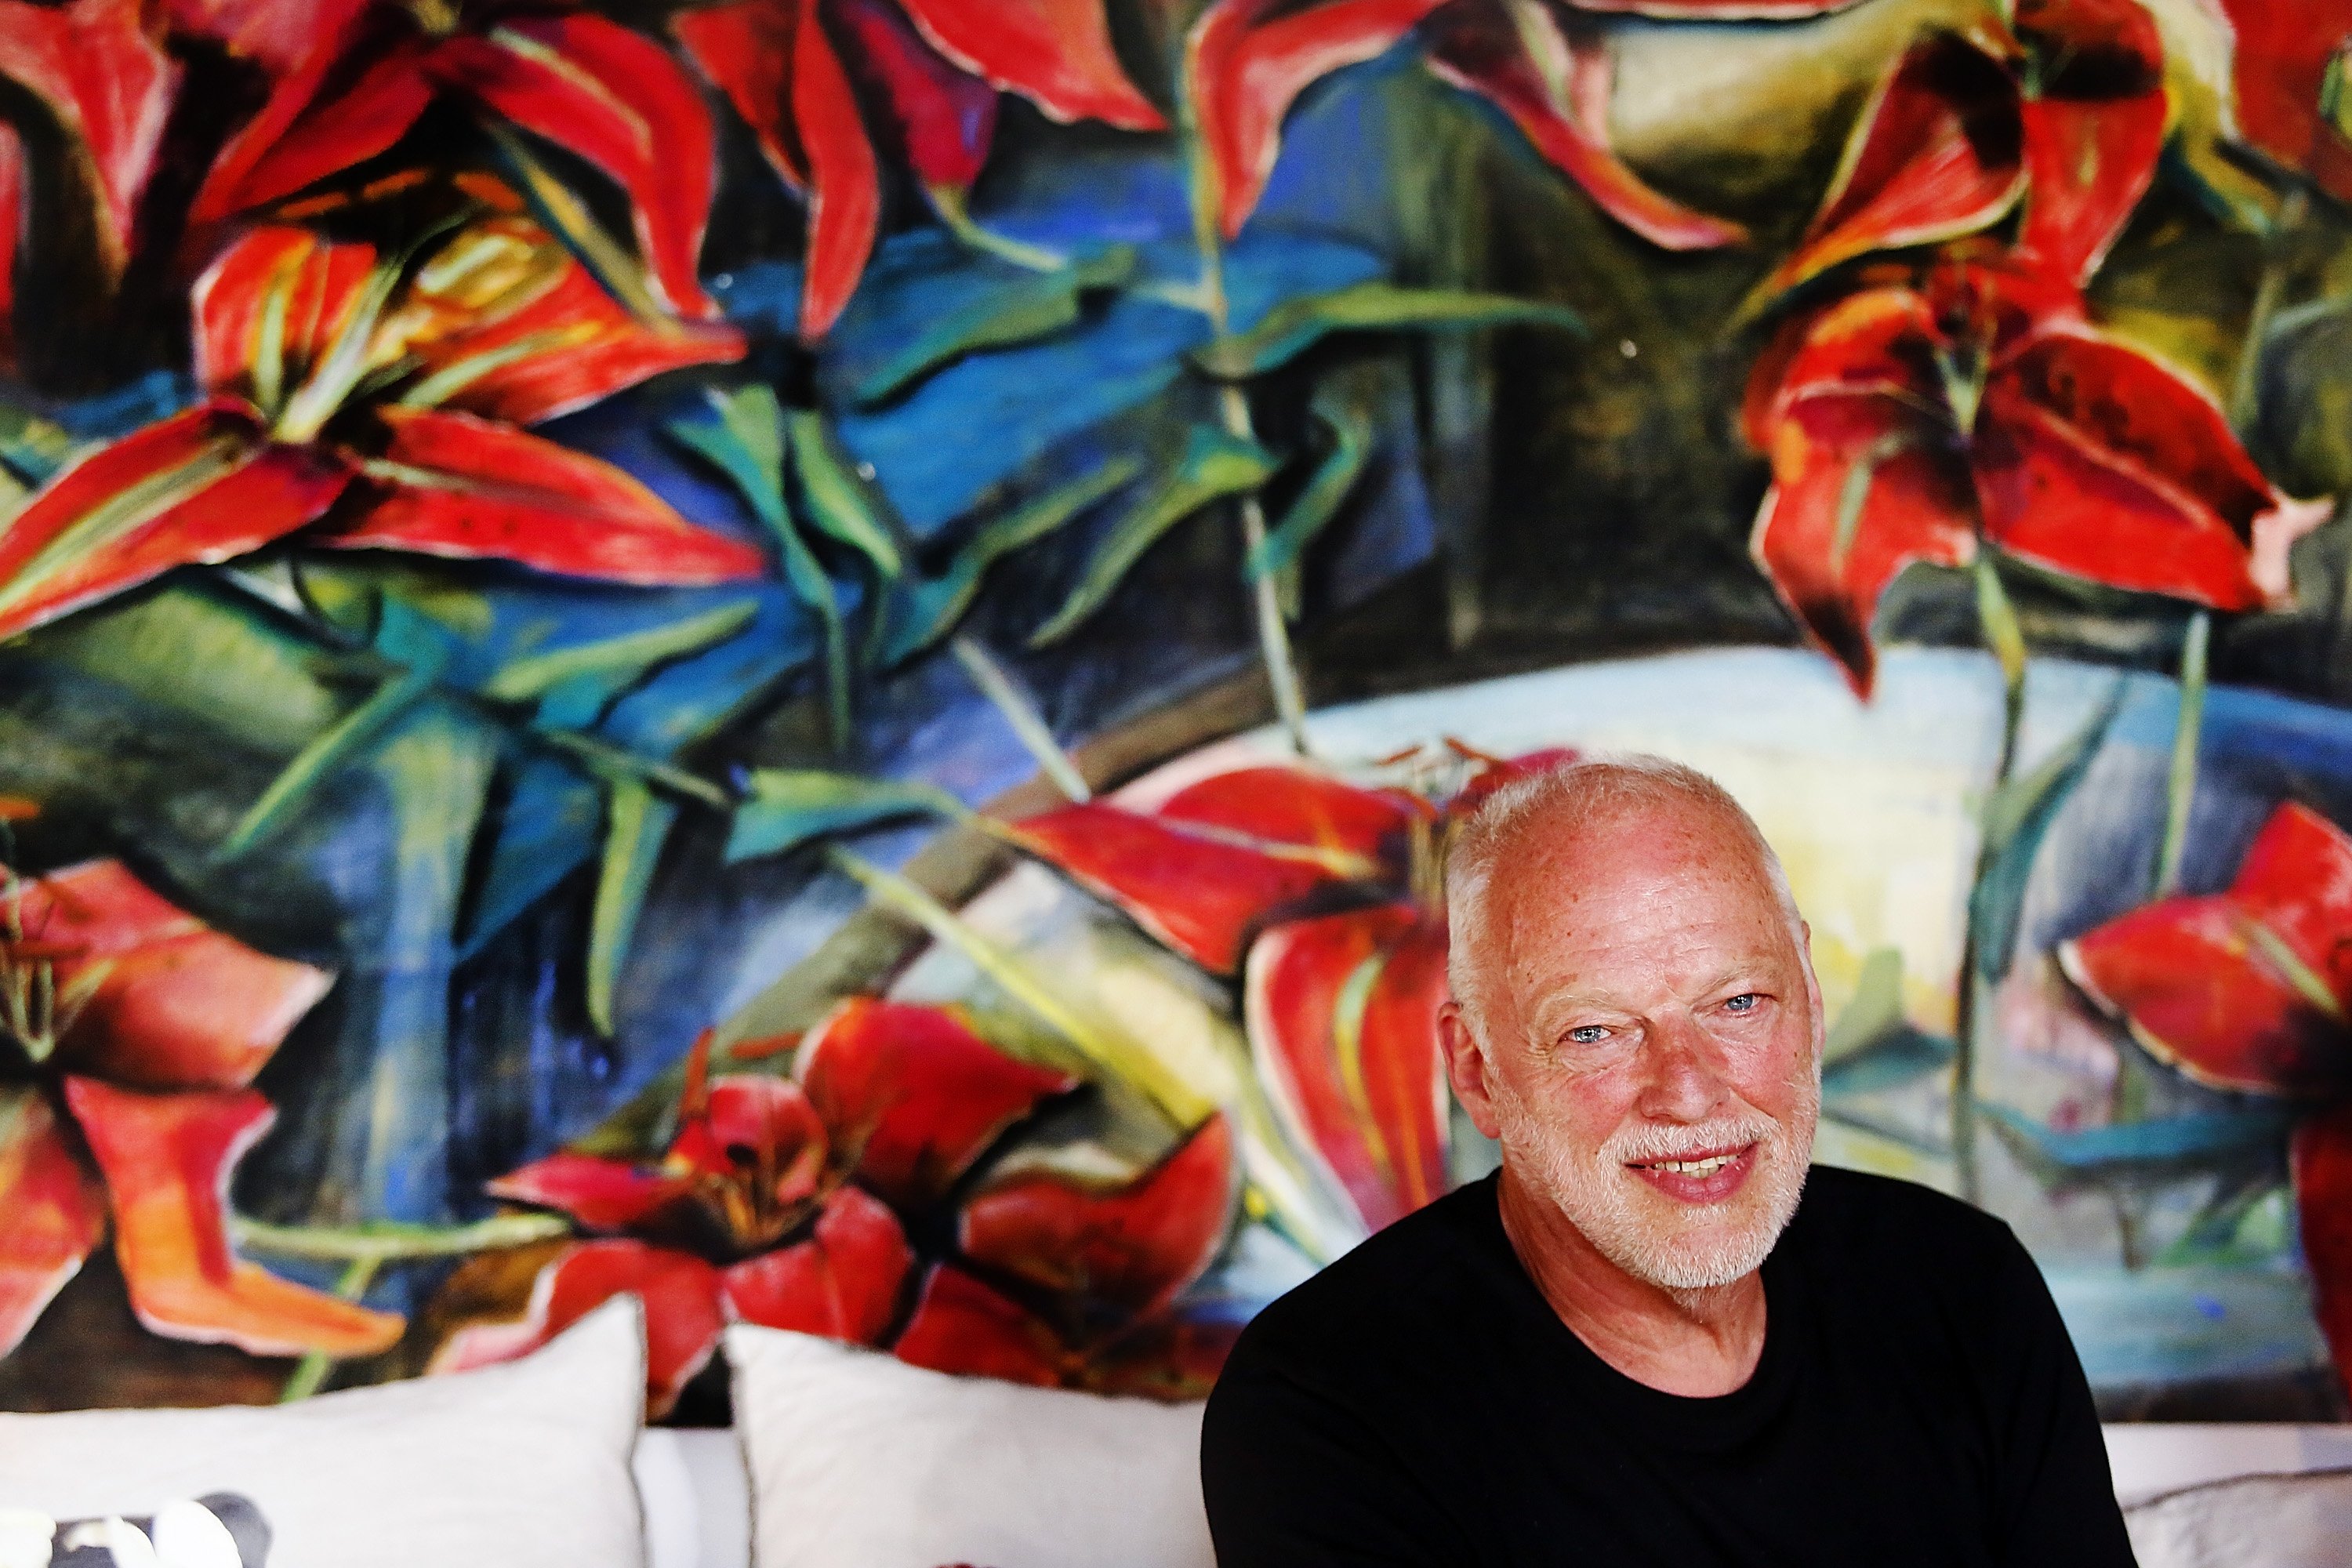 David Gilmour at his wife Polly Samson's "The Kindness" Book Presentation in Rome, Italy, on July 1, 2016. | Source: Getty Images